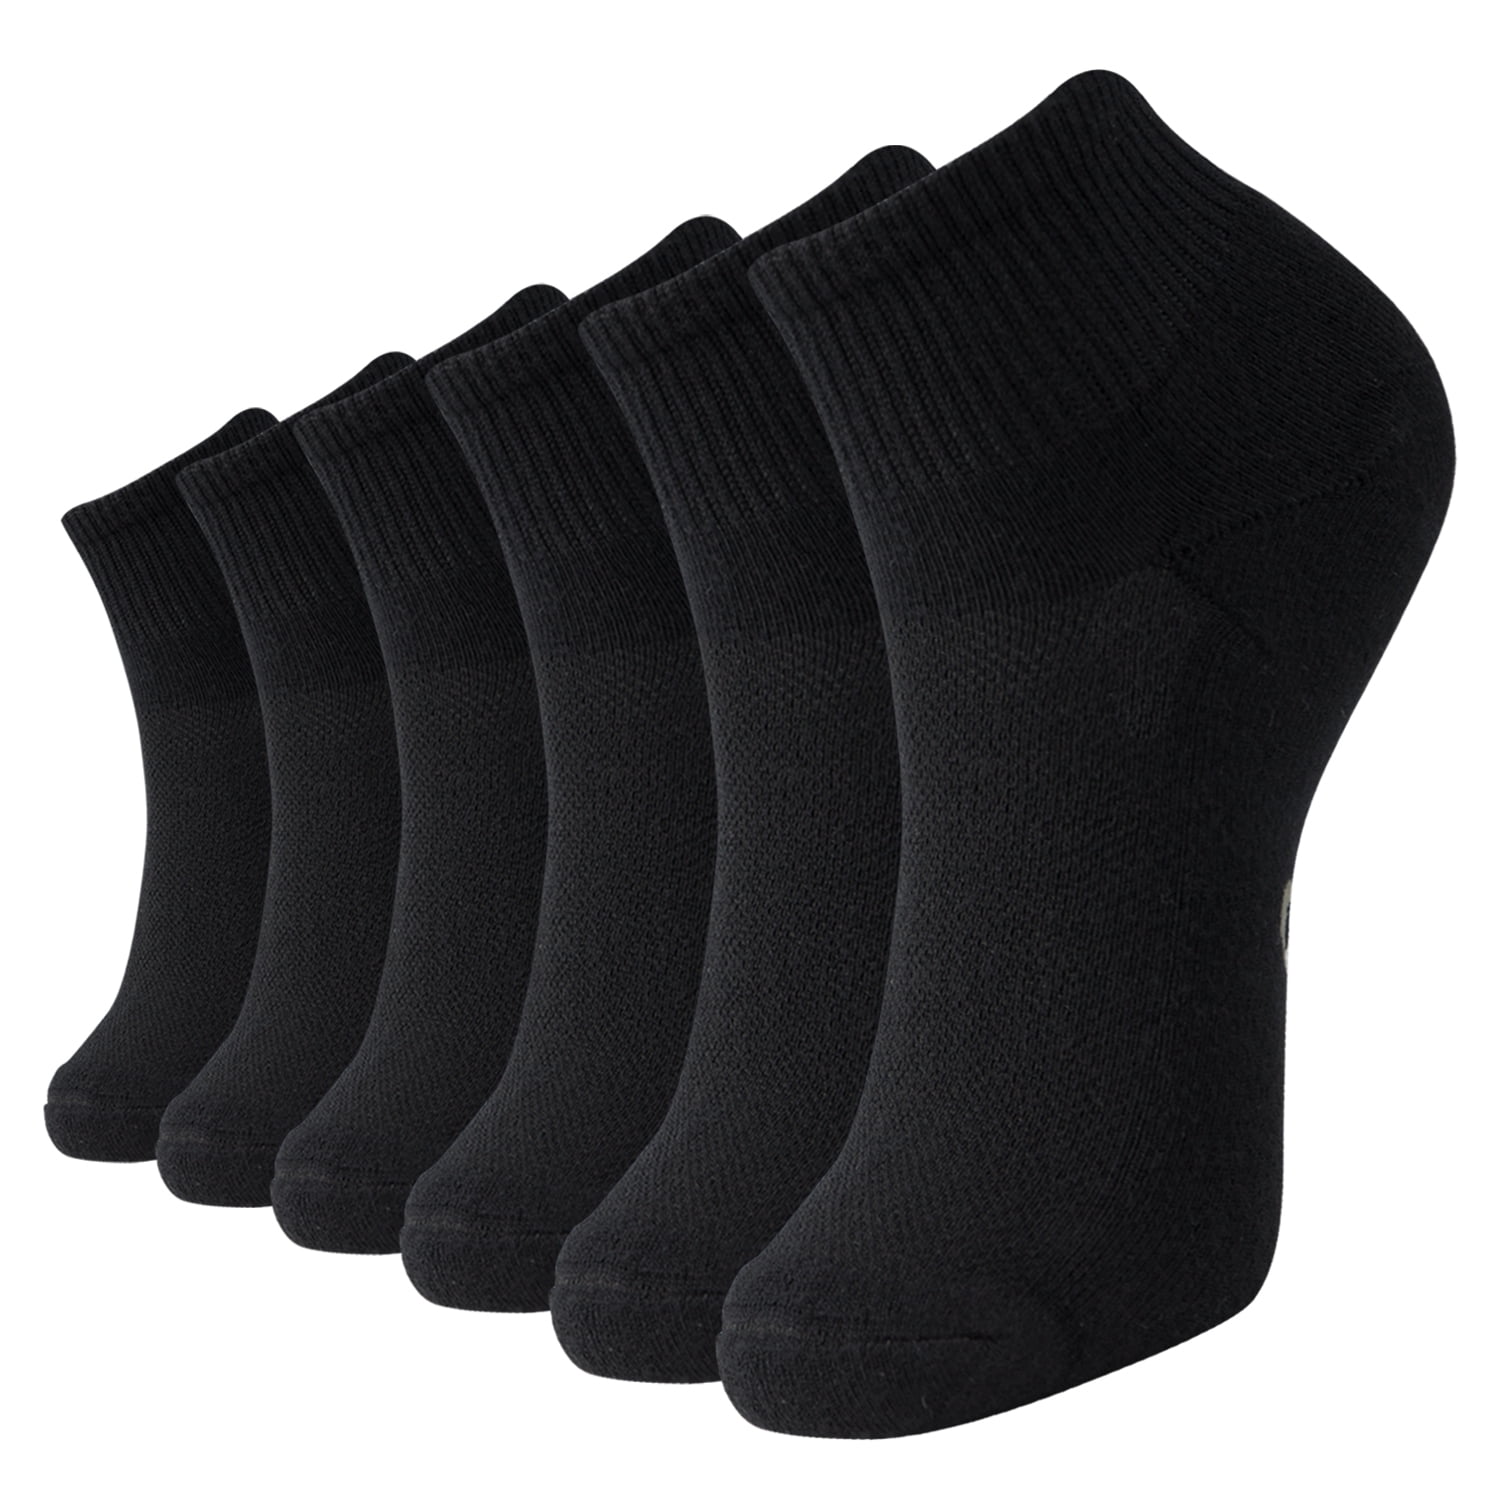 6 Pack +MD Ultra Soft Athletic Bamboo Socks For Women and Men with Hidden Seam Toe No Show Casual Non-Slip